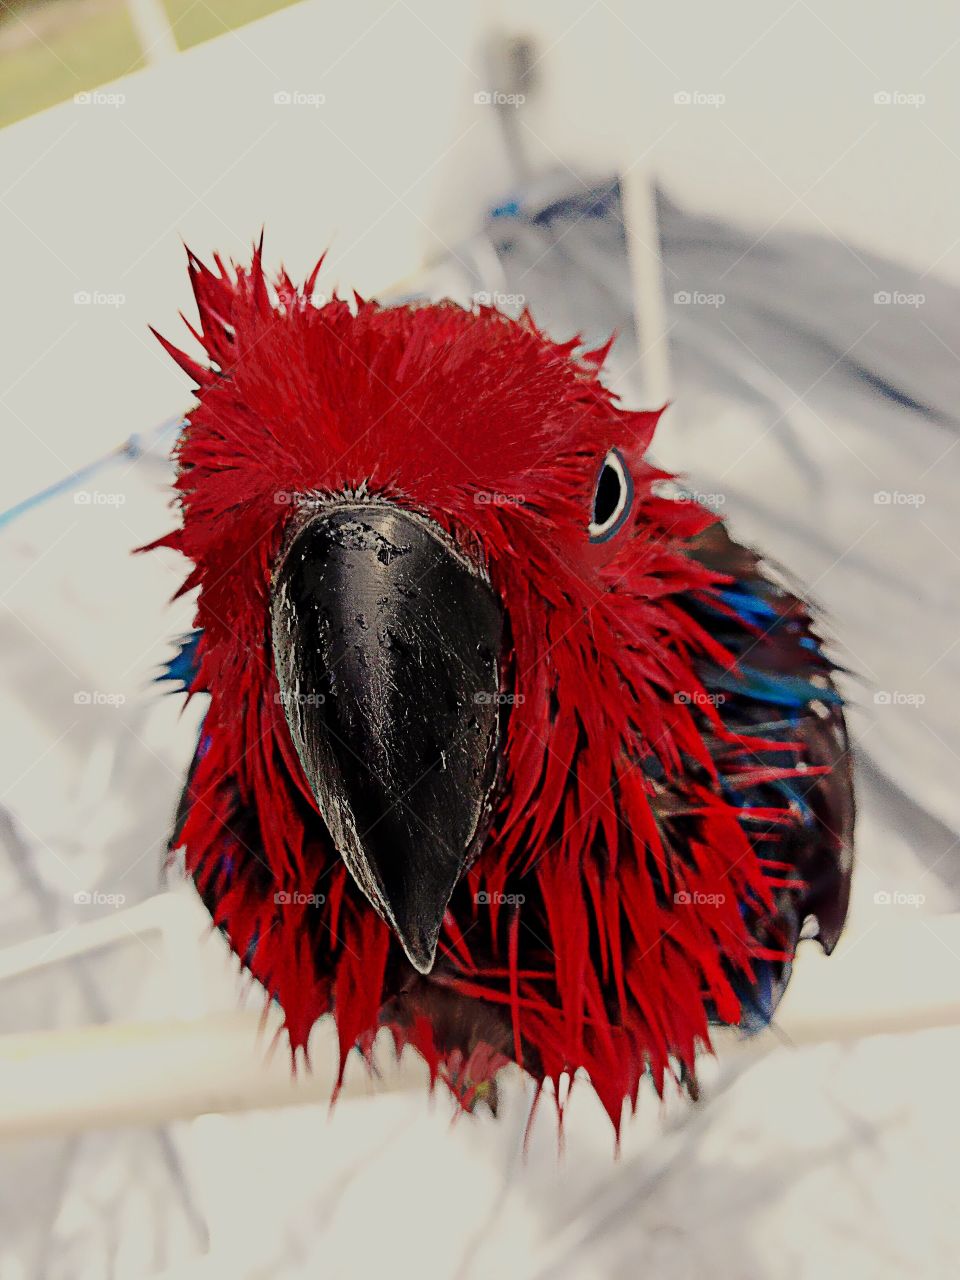 Adorable red Parrot after a bath,  having a bad hair day.